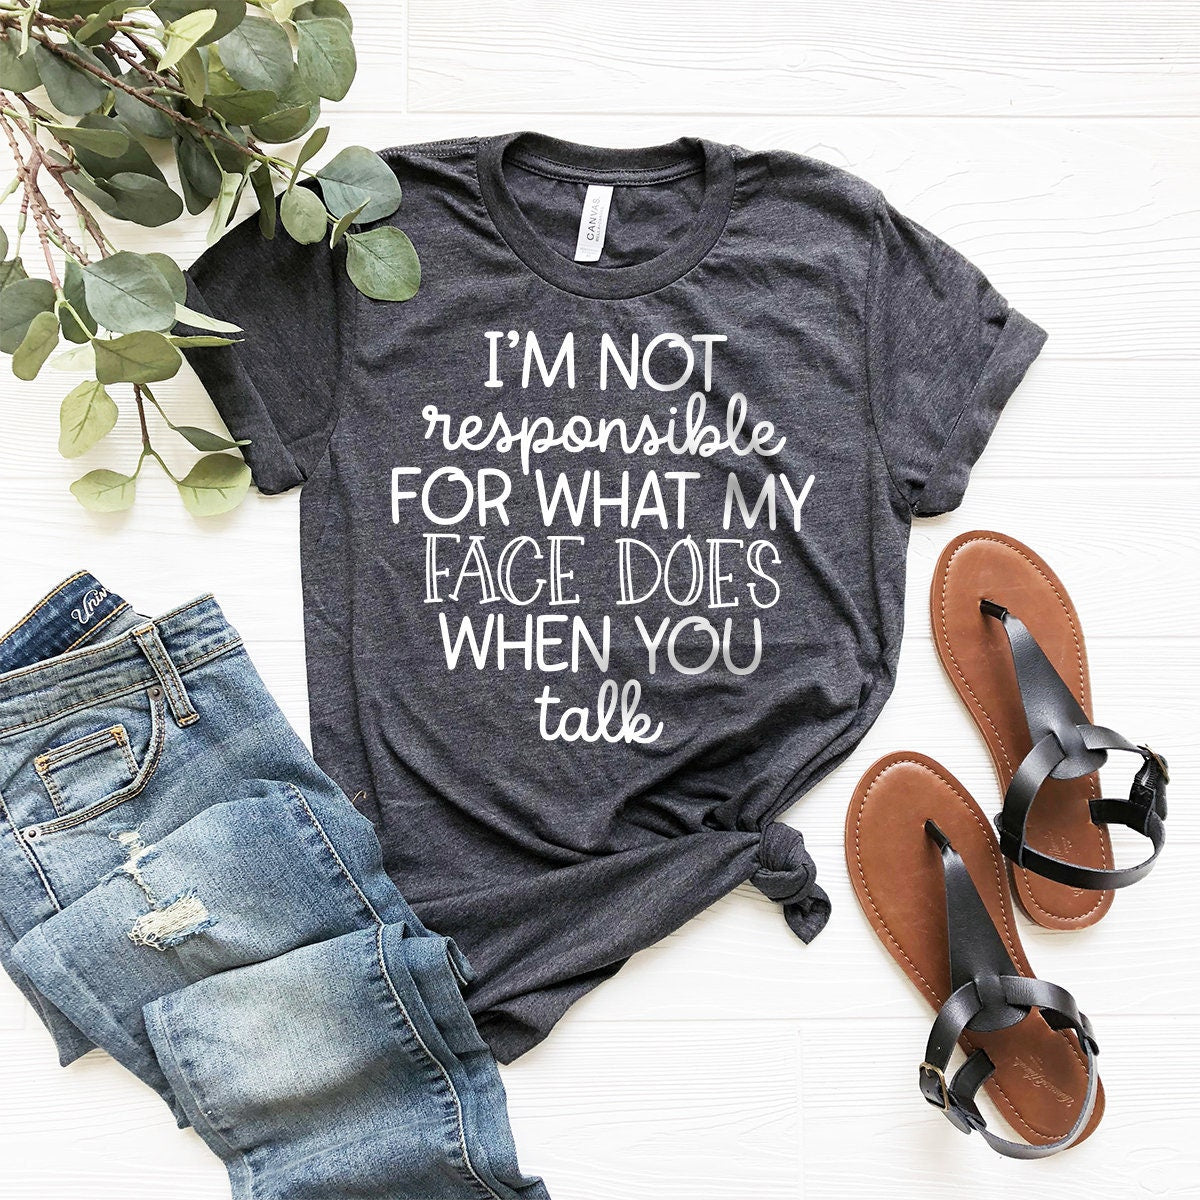 I'm Not Responsible For What My Face Does When You Talk T-Shirt, Responsible Quote Shirt,Sarcastic Tee,Smartass Shirt,Funny Sarcasm Shirt - Fastdeliverytees.com